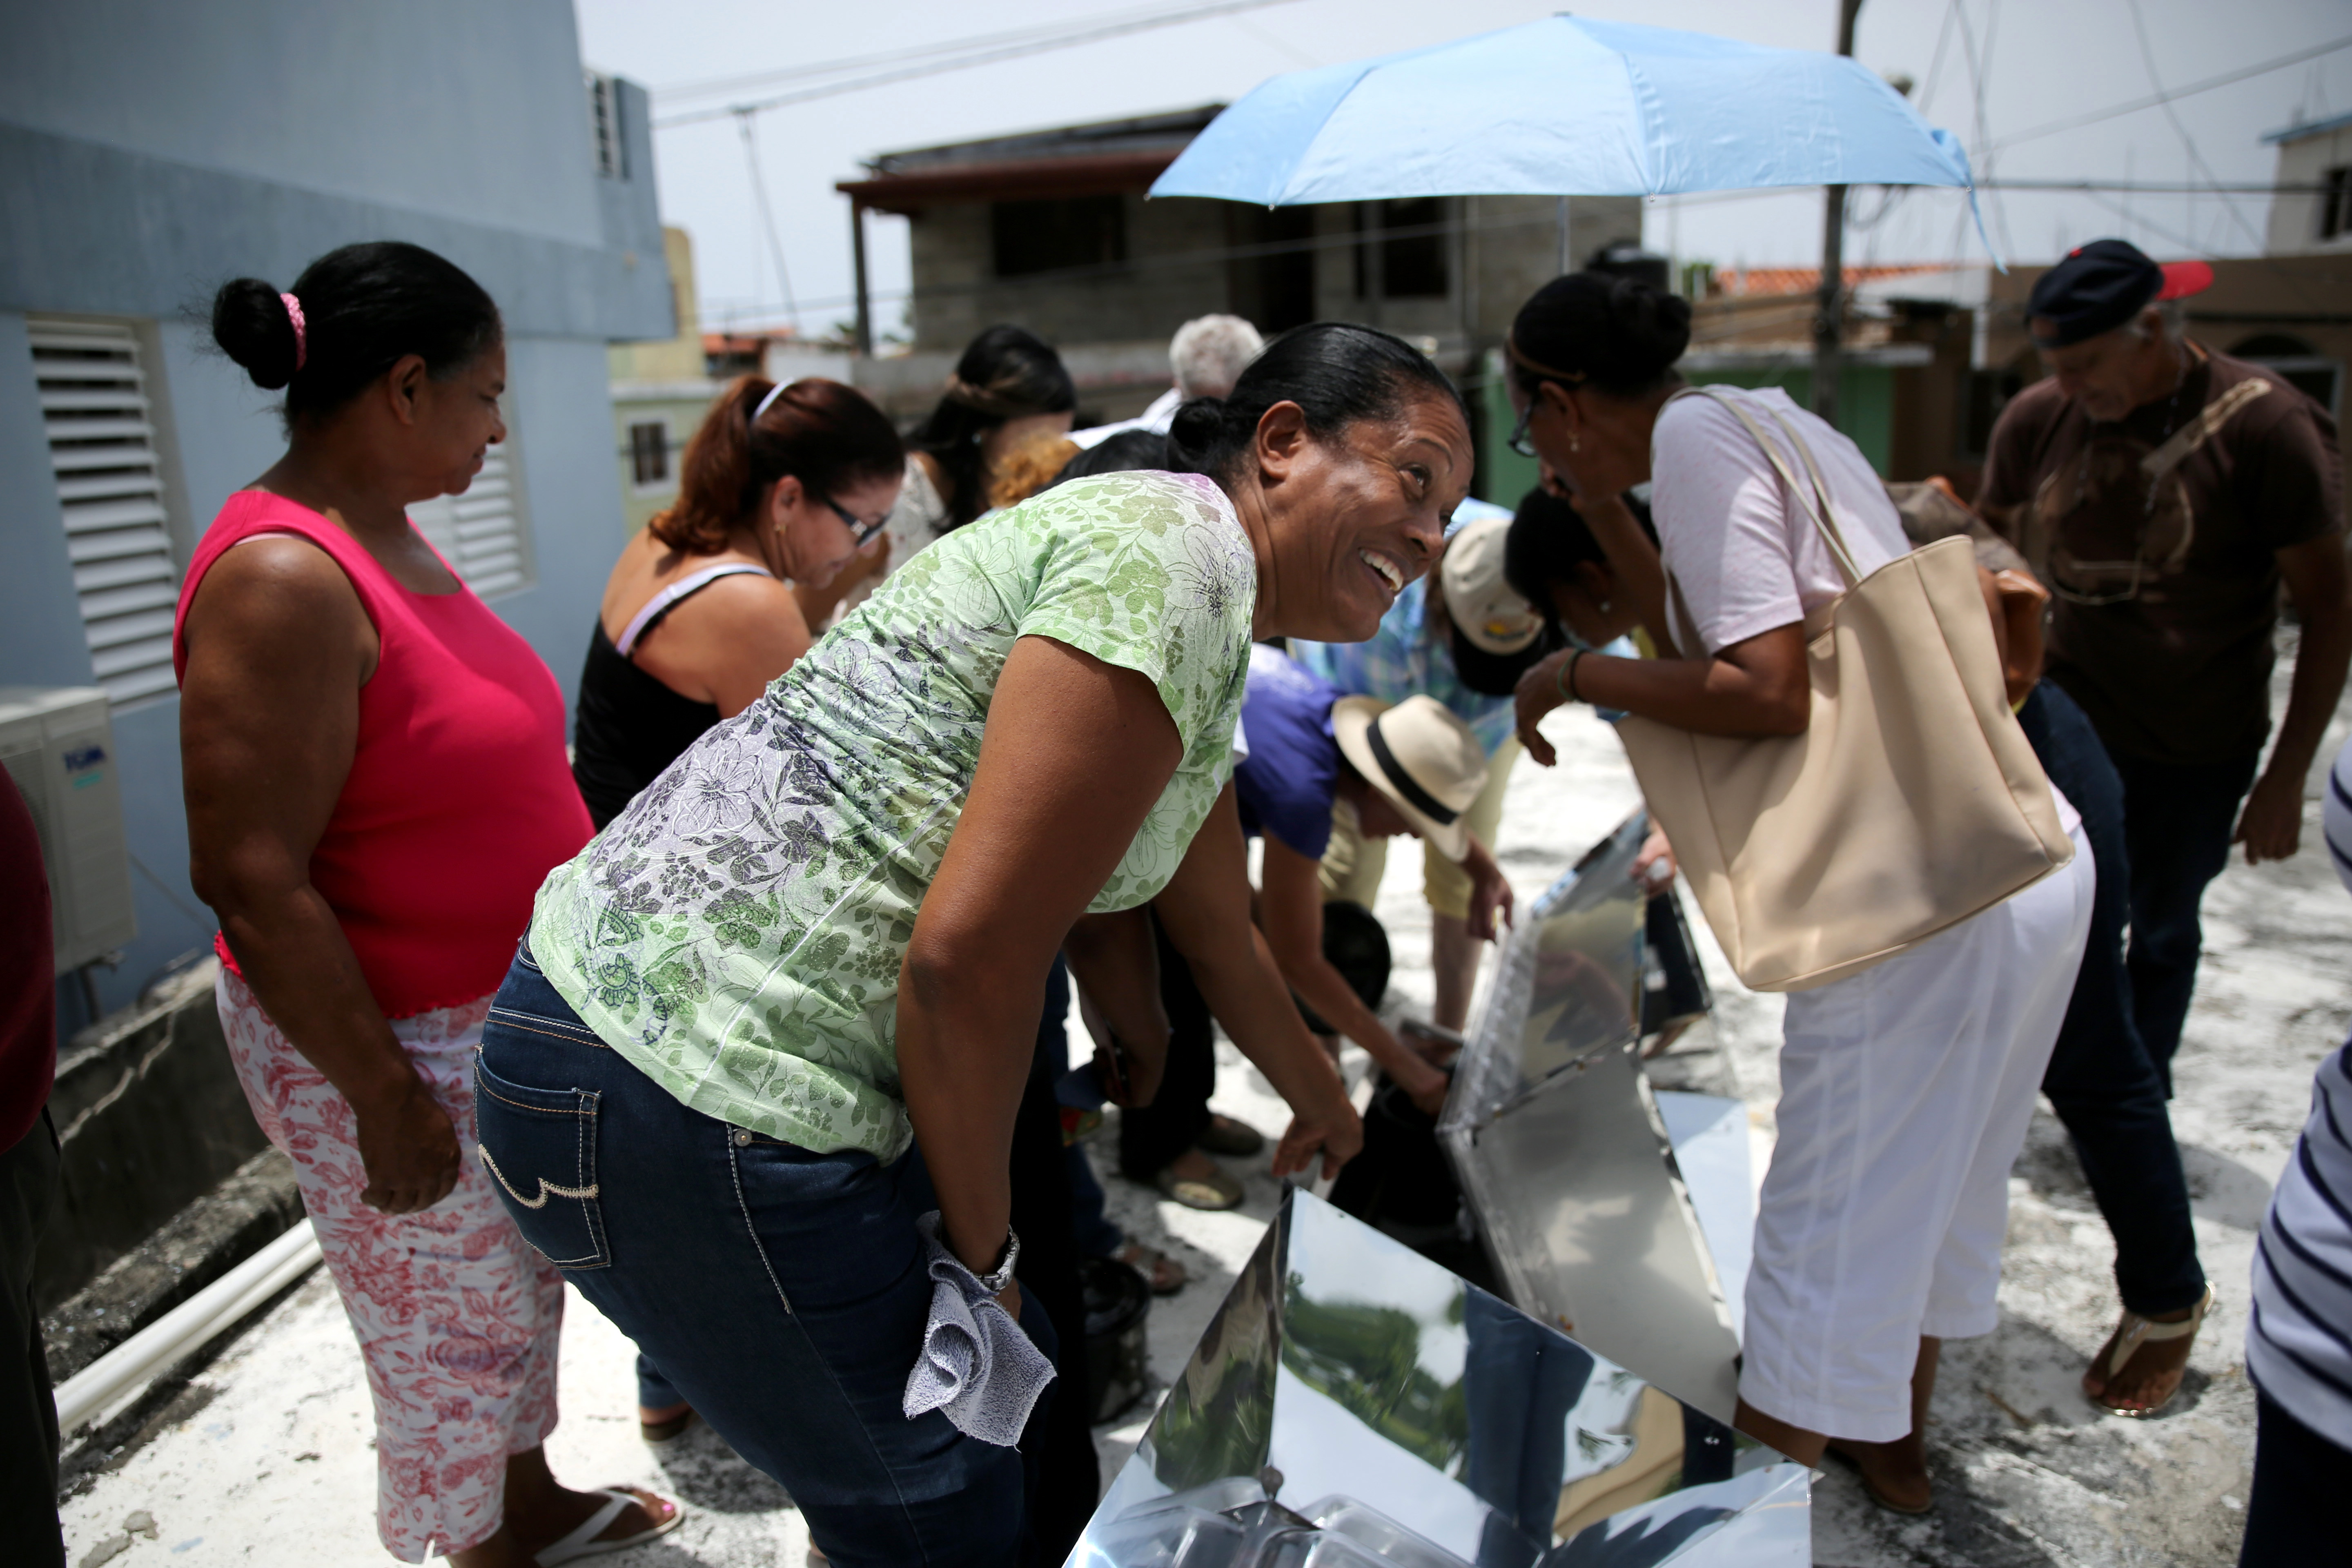 Magdonia Reyes Salazar, a member of the Iglesia Evangelica Dominicana in Sosua, jumps back in surprise after feeling the heat released from a solar oven. The inside of the oven is lined with black material to attract the sun. Two plastic lids insulate it. Image by Makenzie Huber. Dominican Republic, 2016.